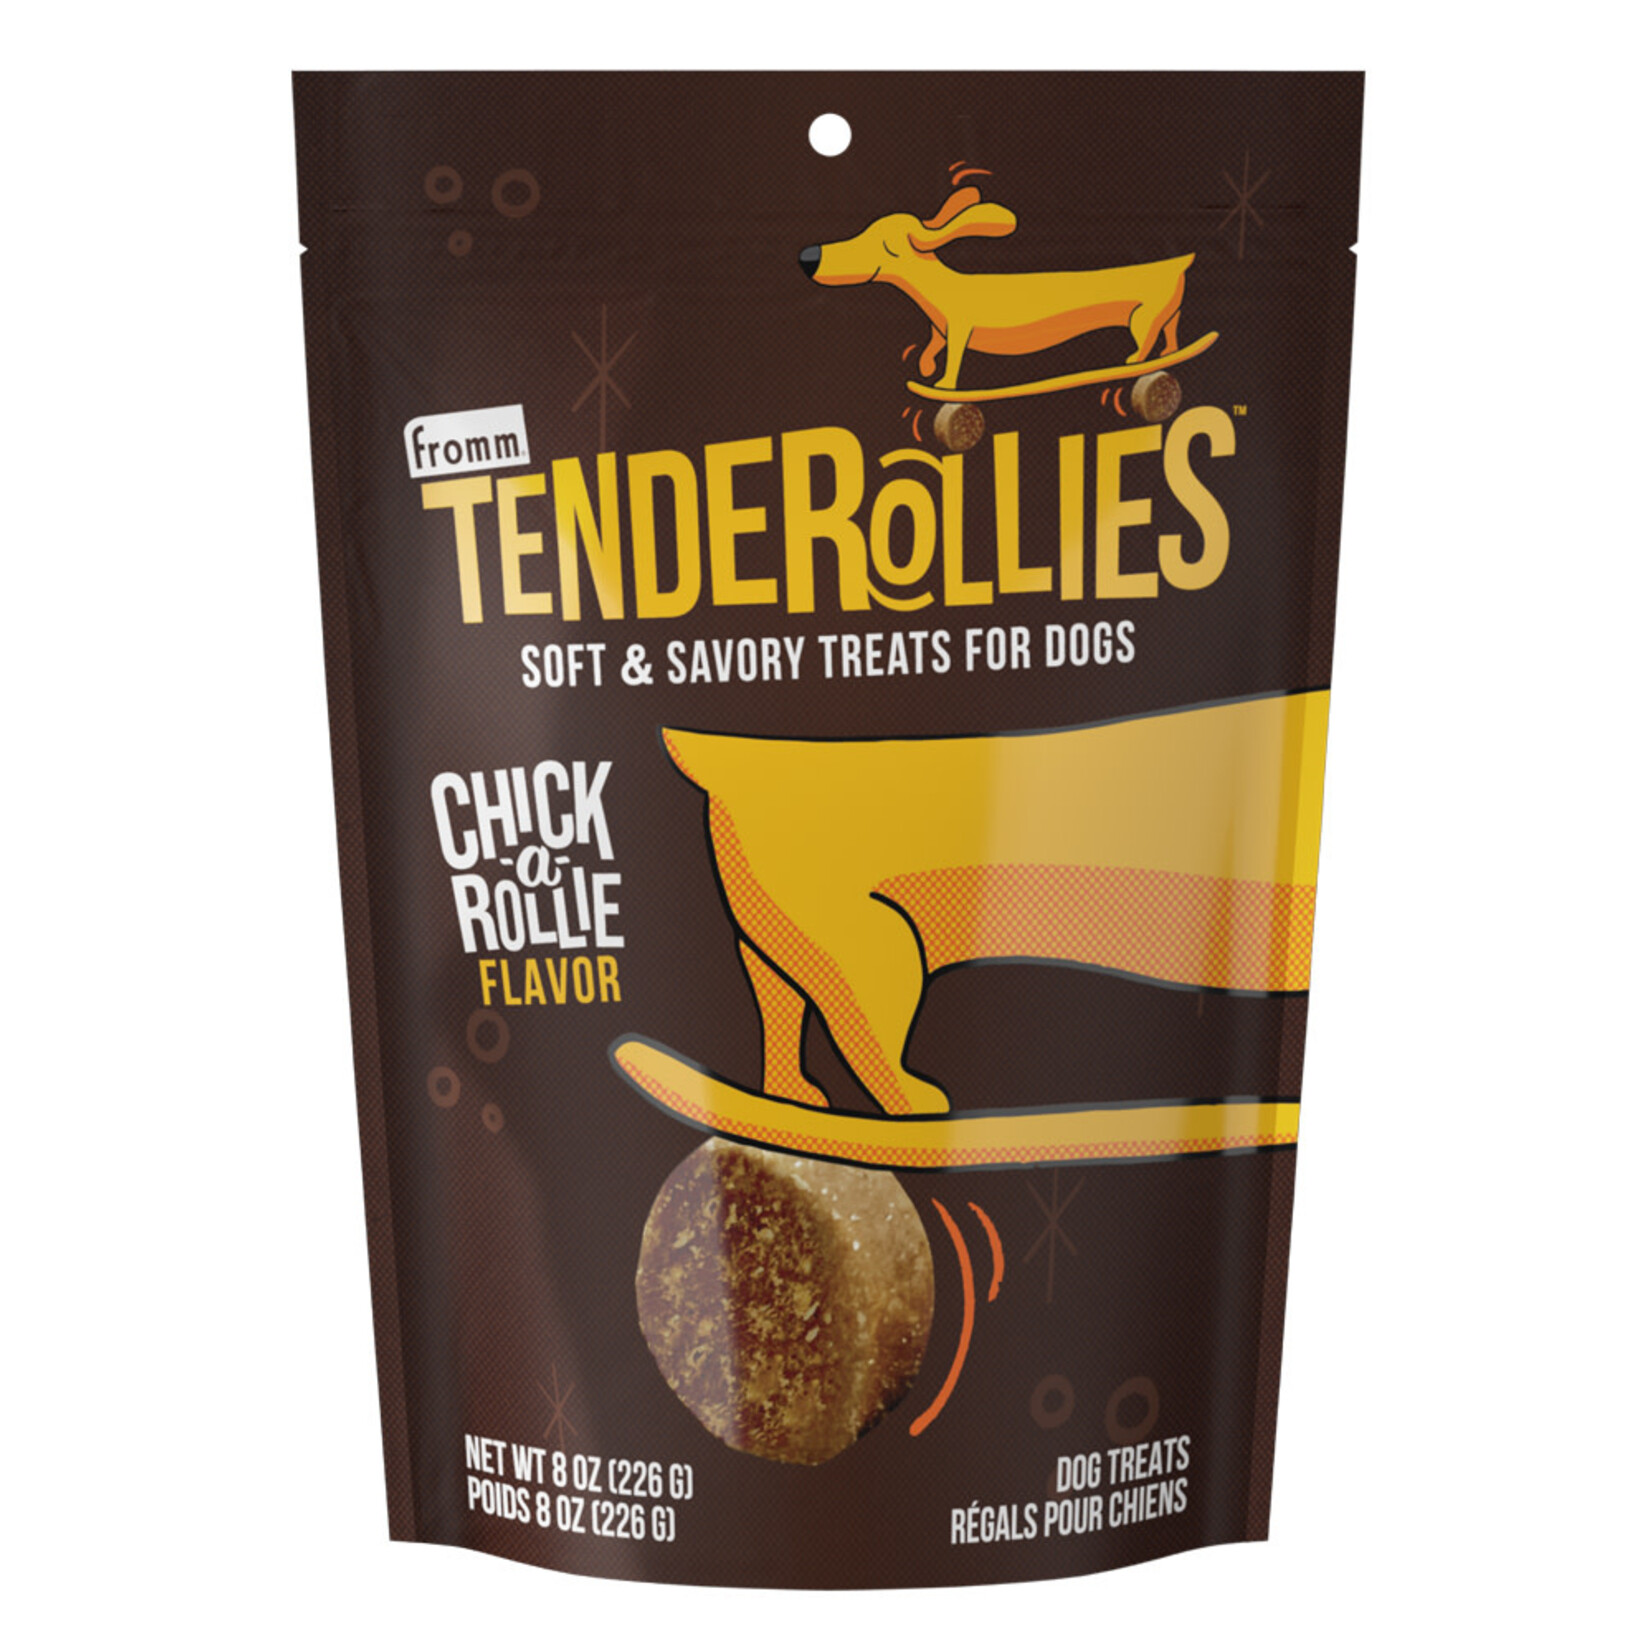 Fromm Tenderollies Soft & Savory Treats for Dogs Chick-a-Rollie Flavor